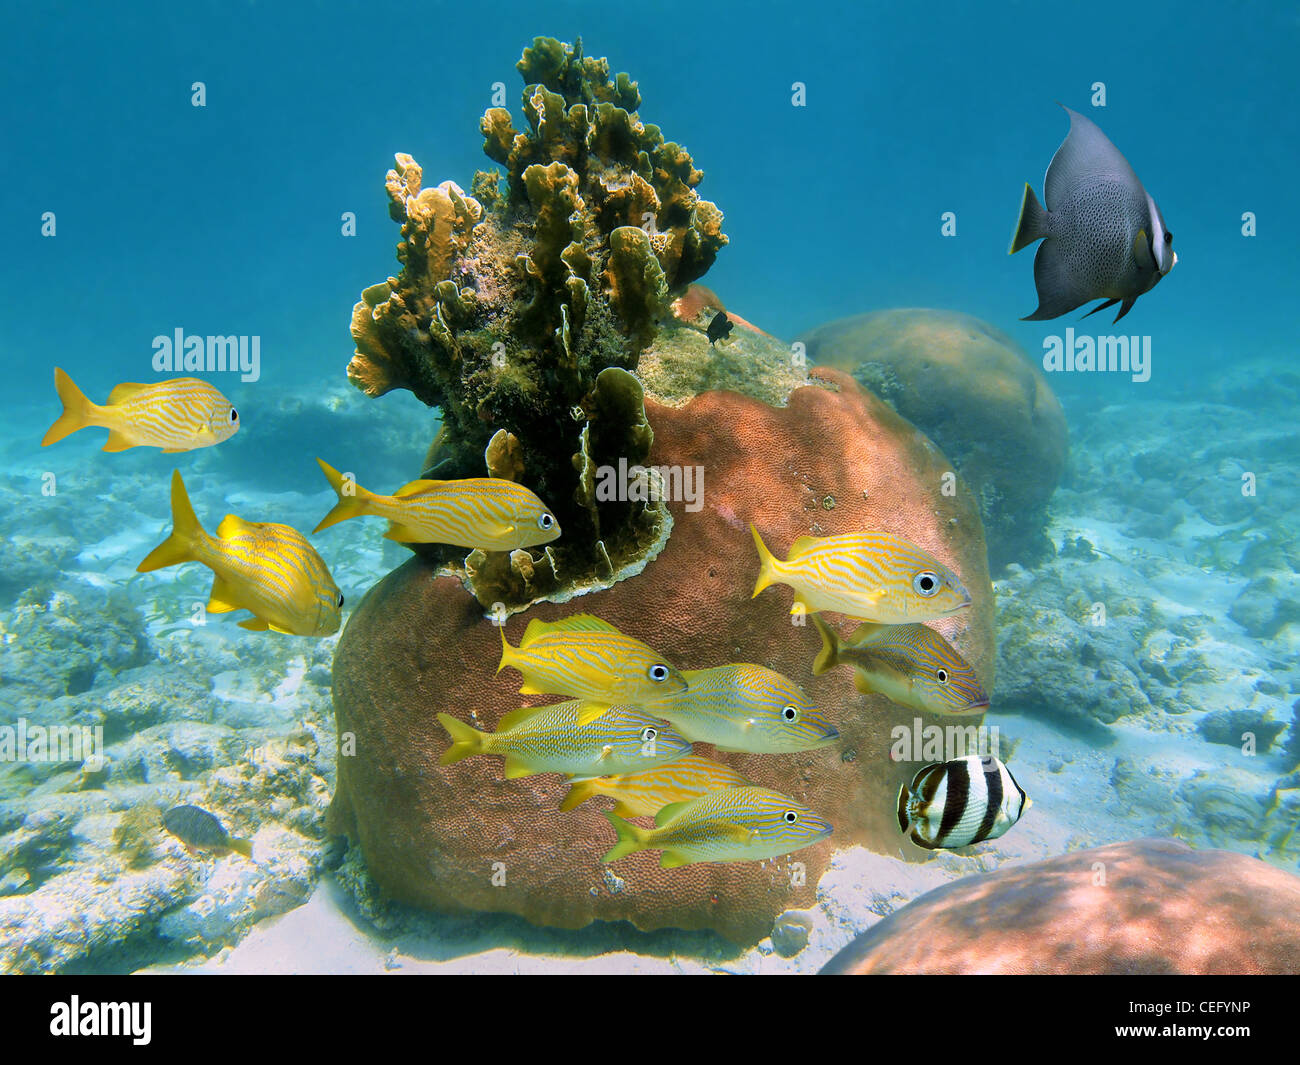 Corals with tropical fish underwater, Bahamas Stock Photo